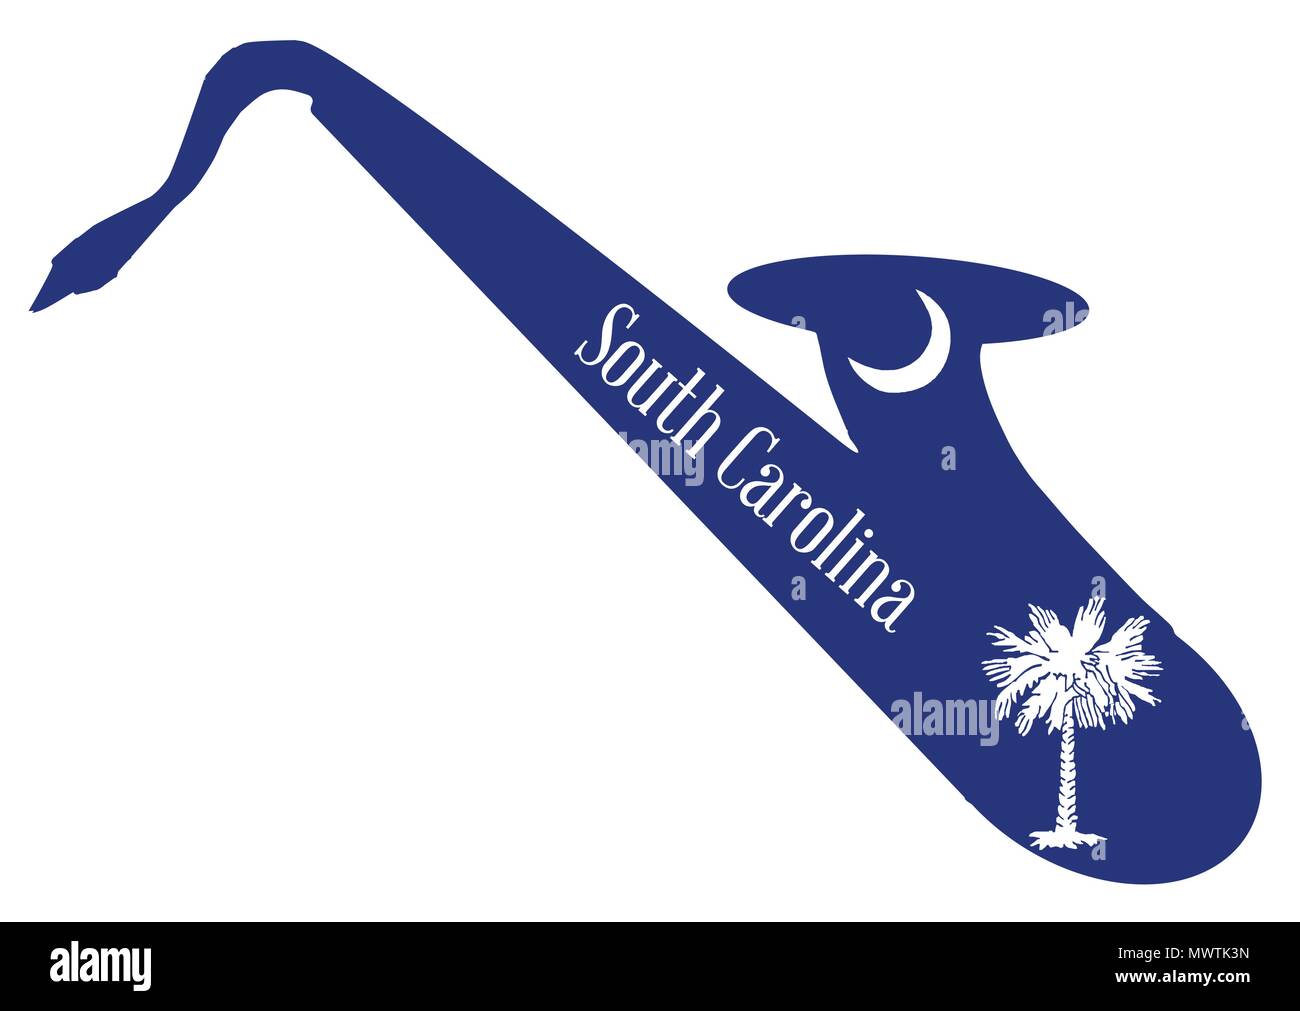 Silhouette of a saxophone with an impression the flag of the USA state of South Carolina over a white background Stock Vector